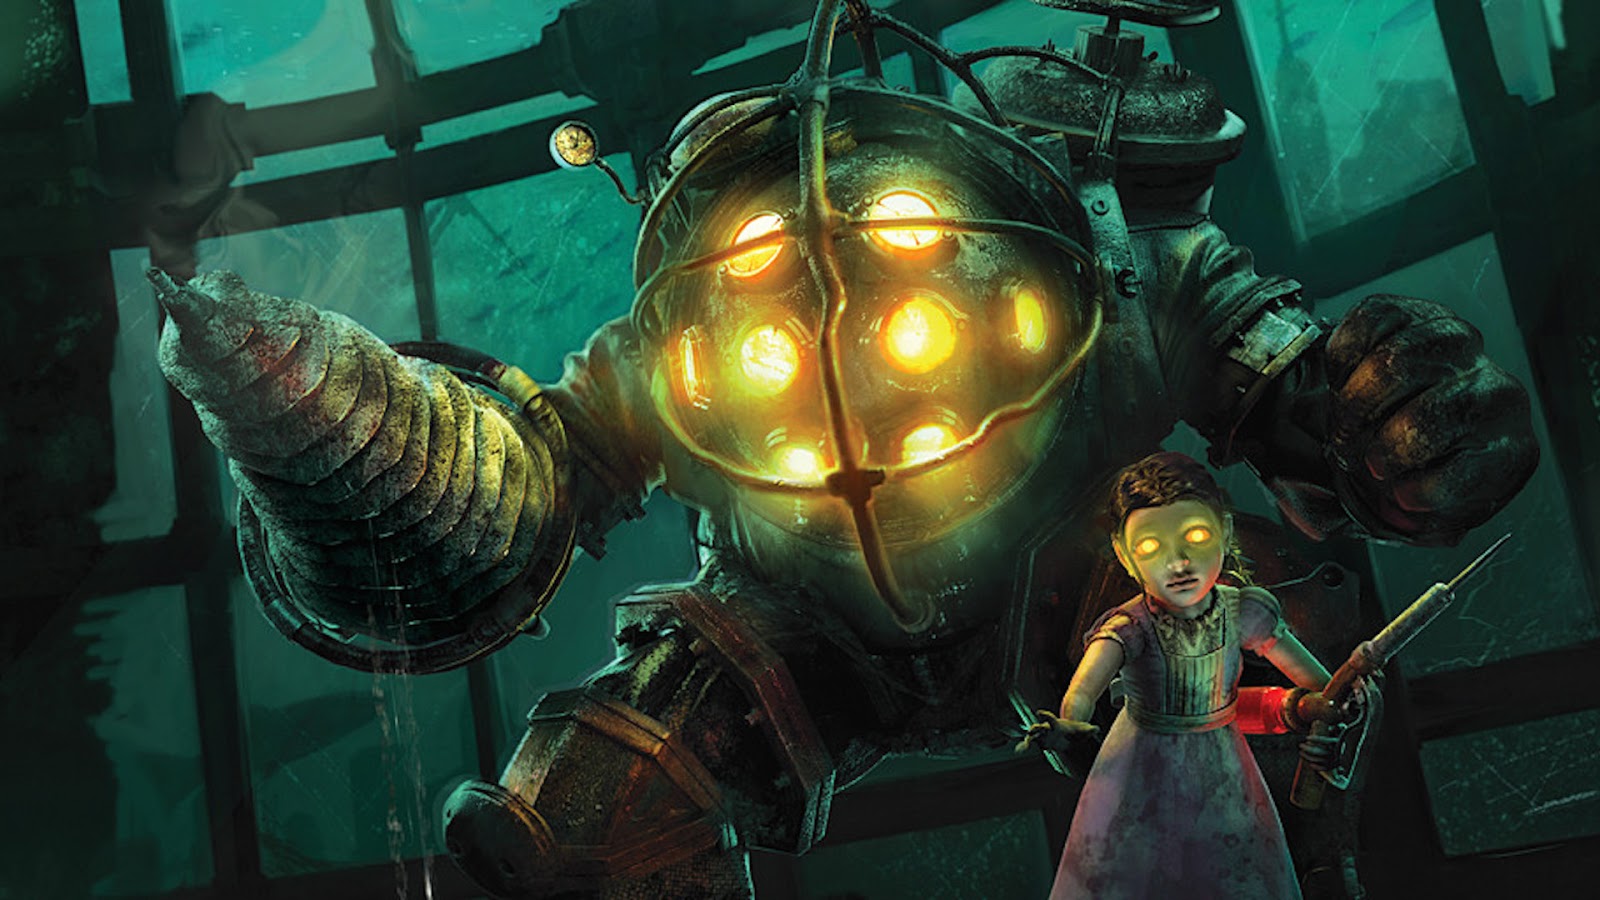 download bioshock the collection ps4 for free